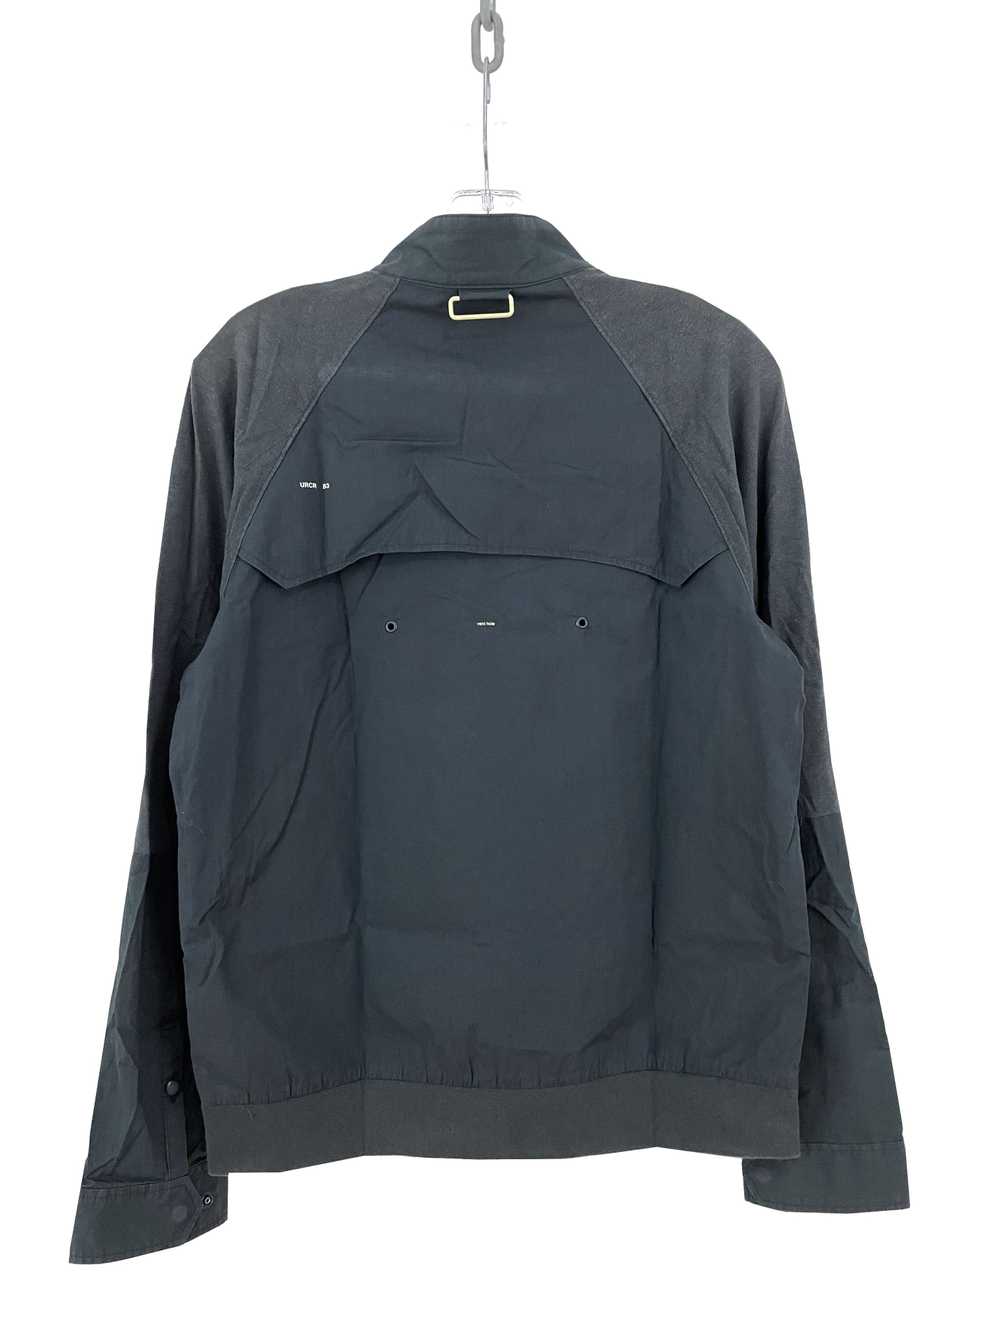 UNDERCOVER SS10 Less But Better Jacket - image 8